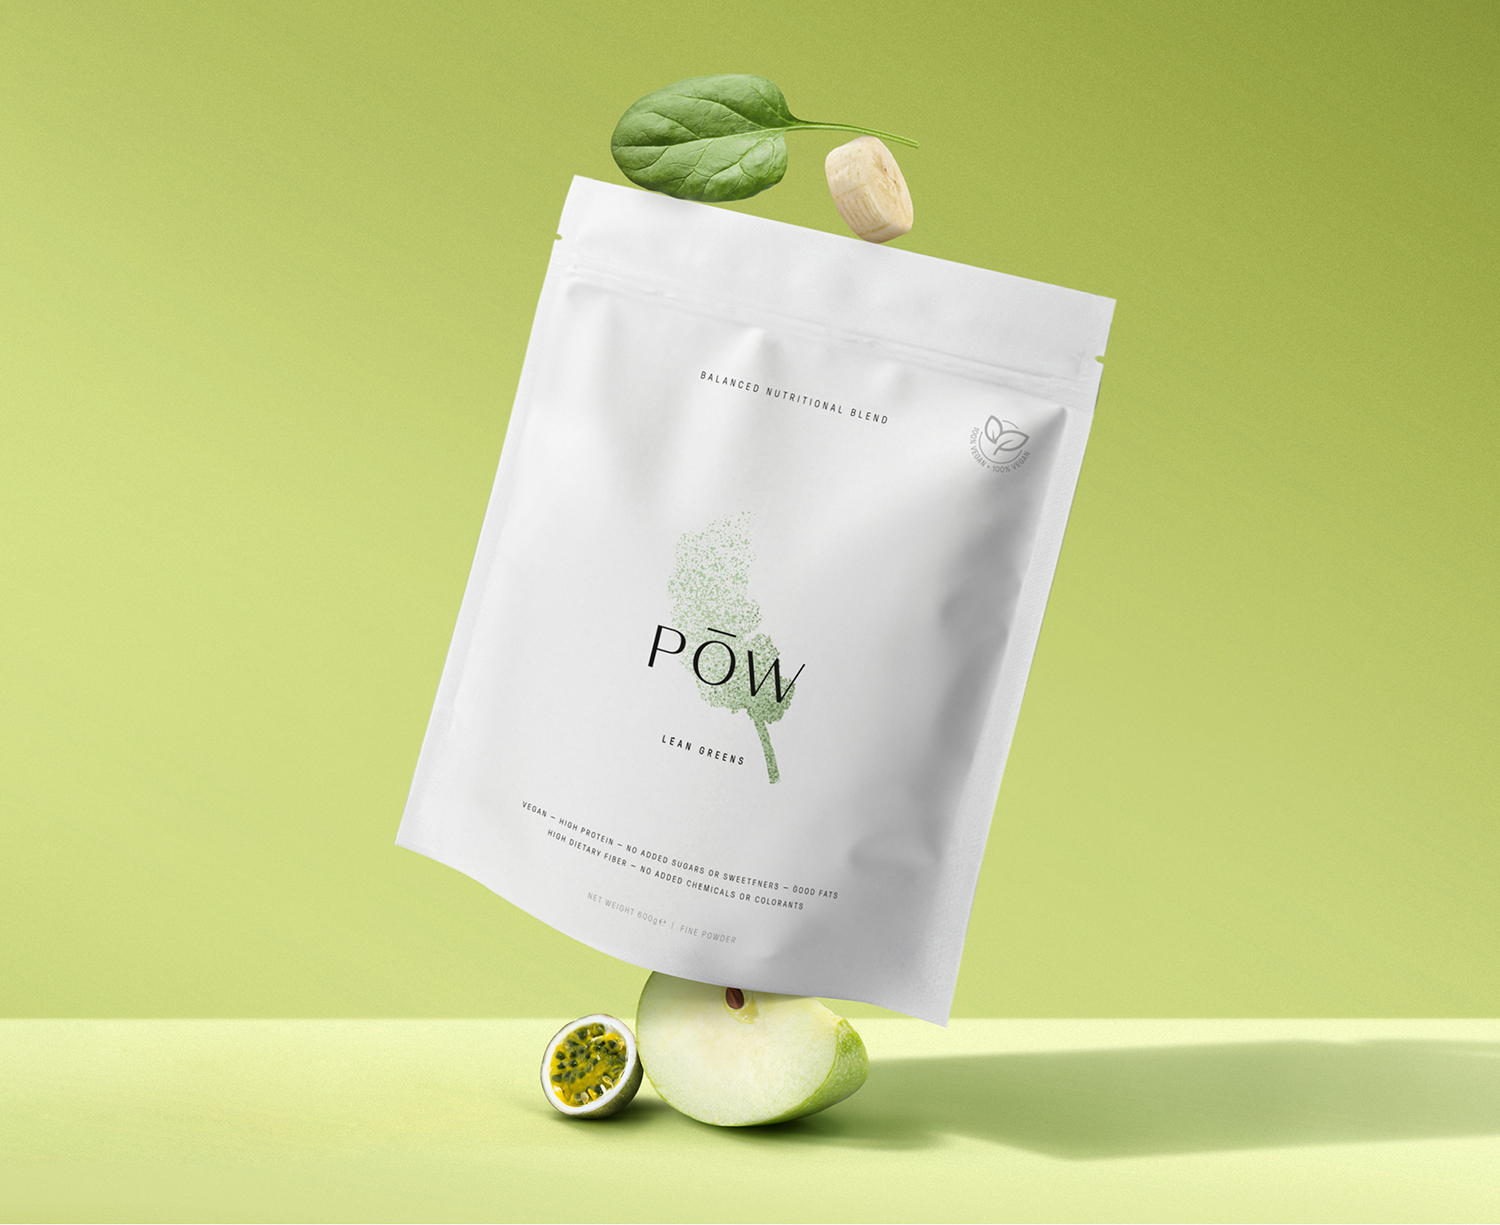 Pōw Nutritional Blends Brand and Packaging Design Created by Davy Dooms